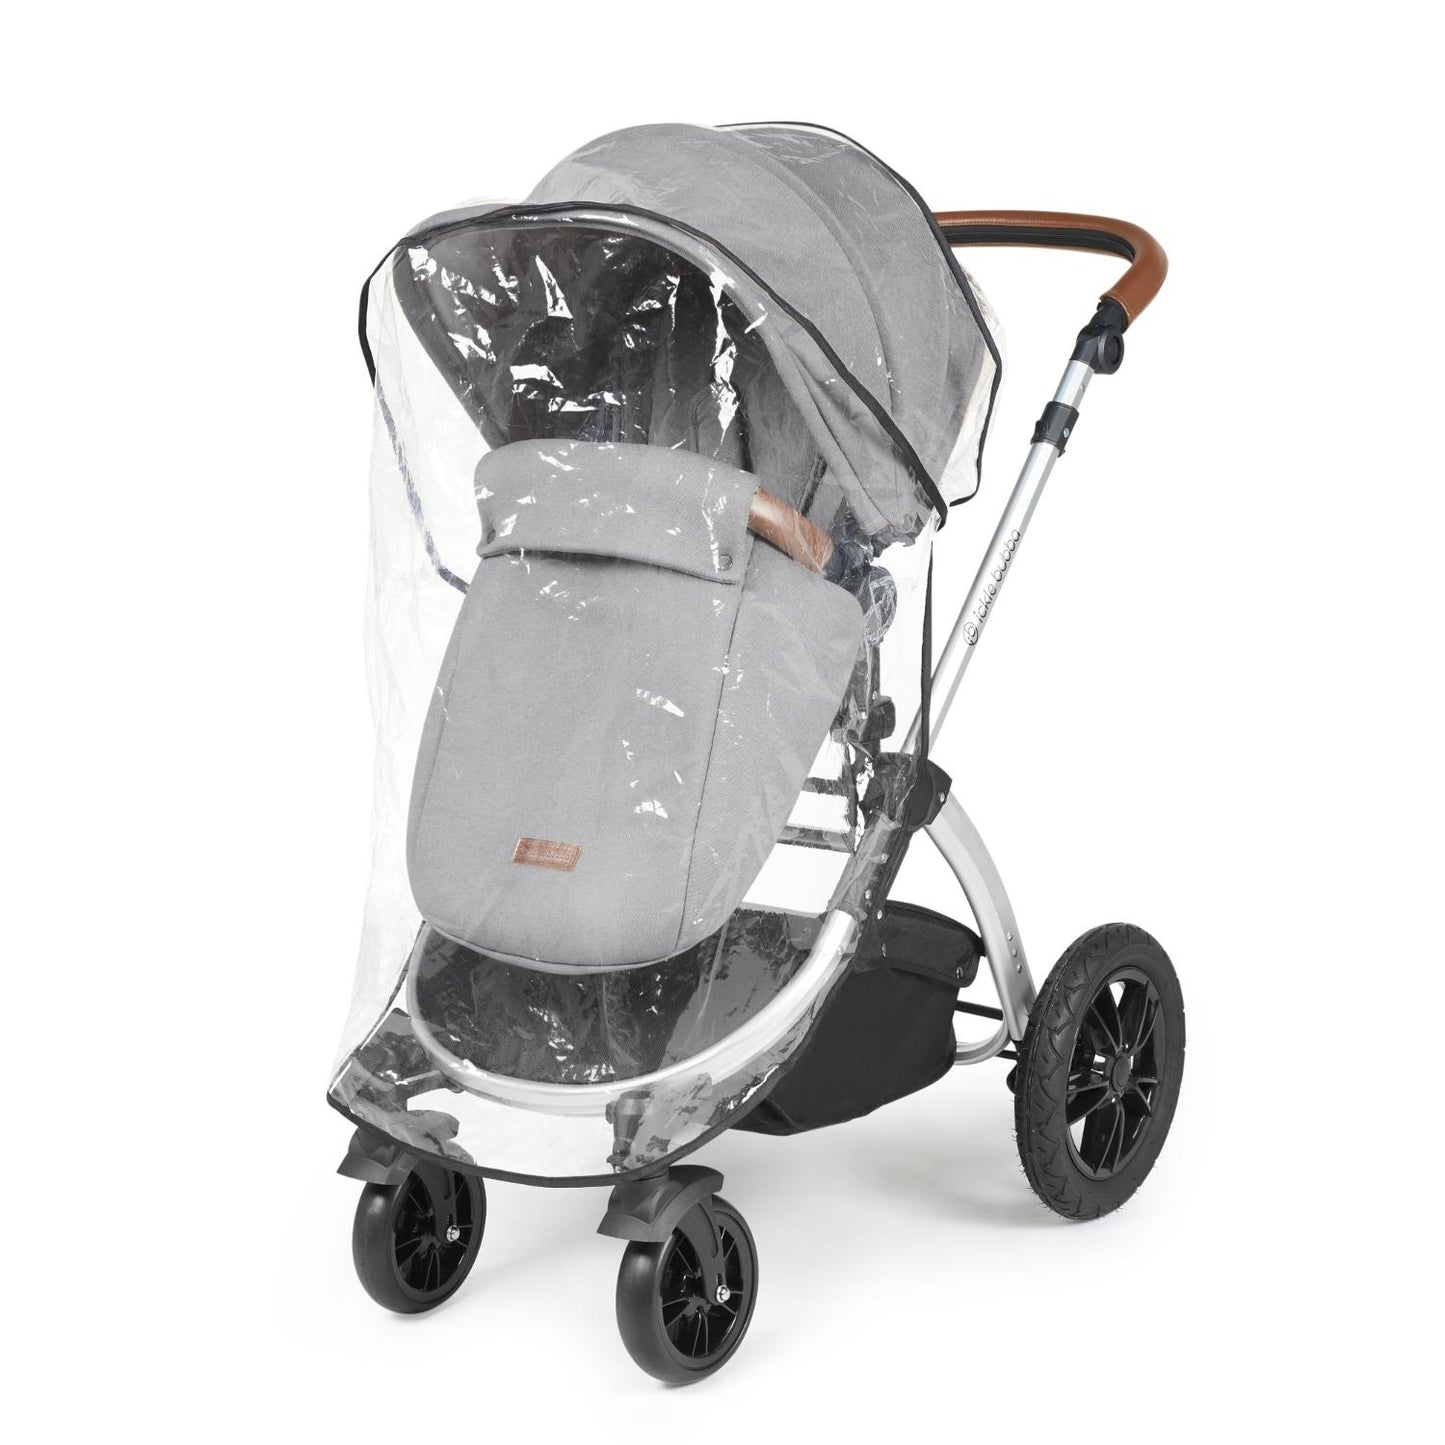 Rain cover placed on an Ickle Bubba Stomp Luxe Pushchair in Pearl Grey colour with silver chassis and tan handle